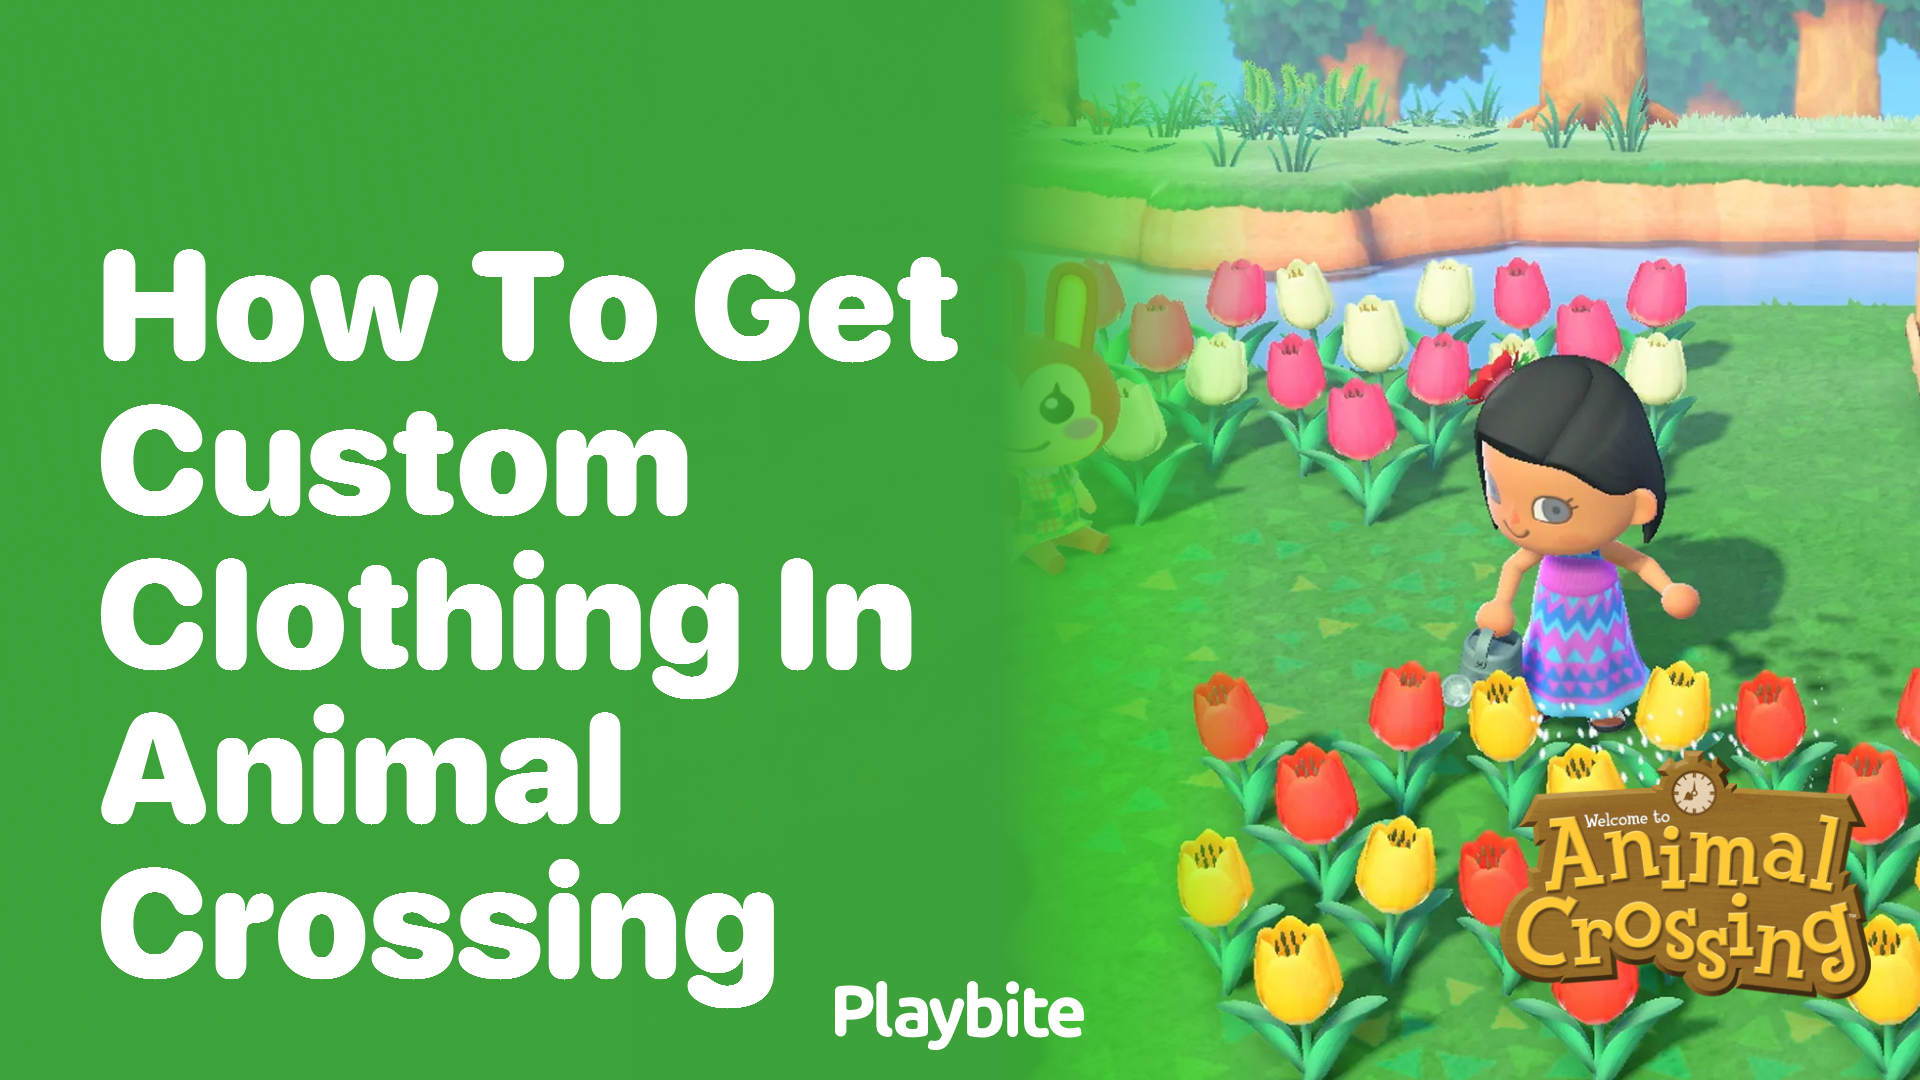 How to Get Custom Clothing in Animal Crossing - Playbite